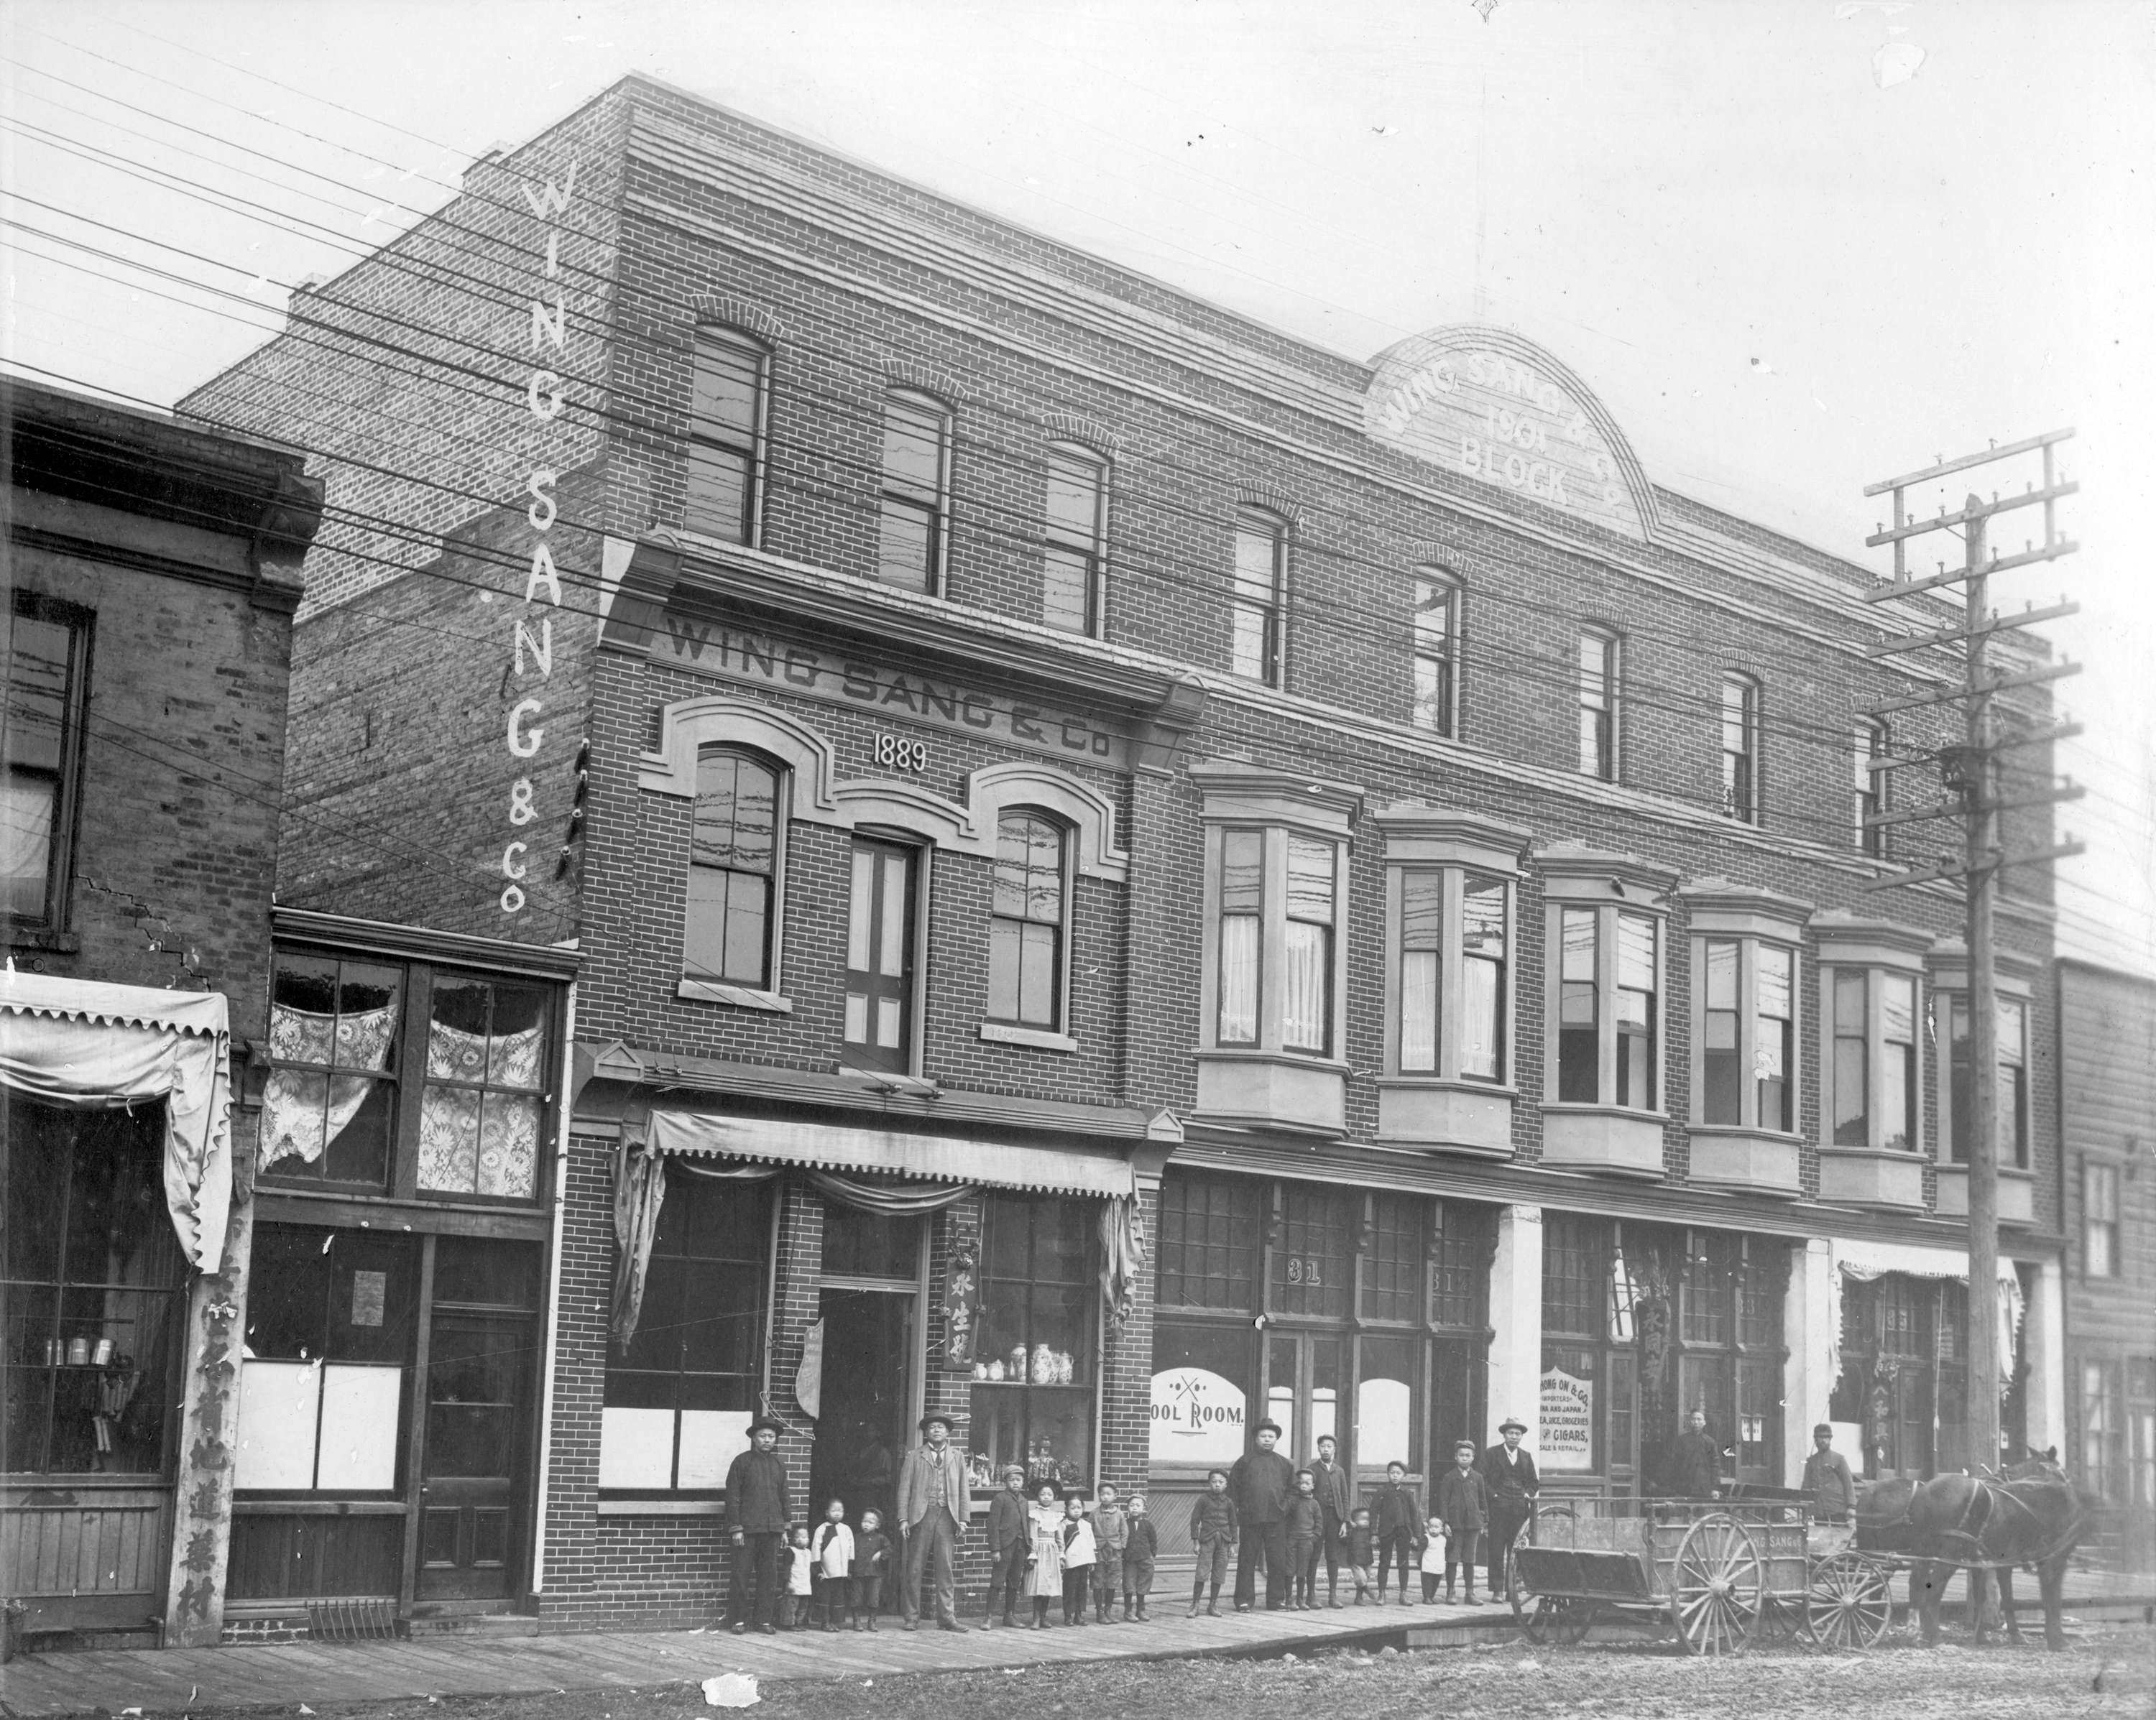 Wing Sang Building, home of the new Chinese Canadian Museum, is the oldest building in Vancouver’s Chinatown (Photo: Chinese Canadian Museum)